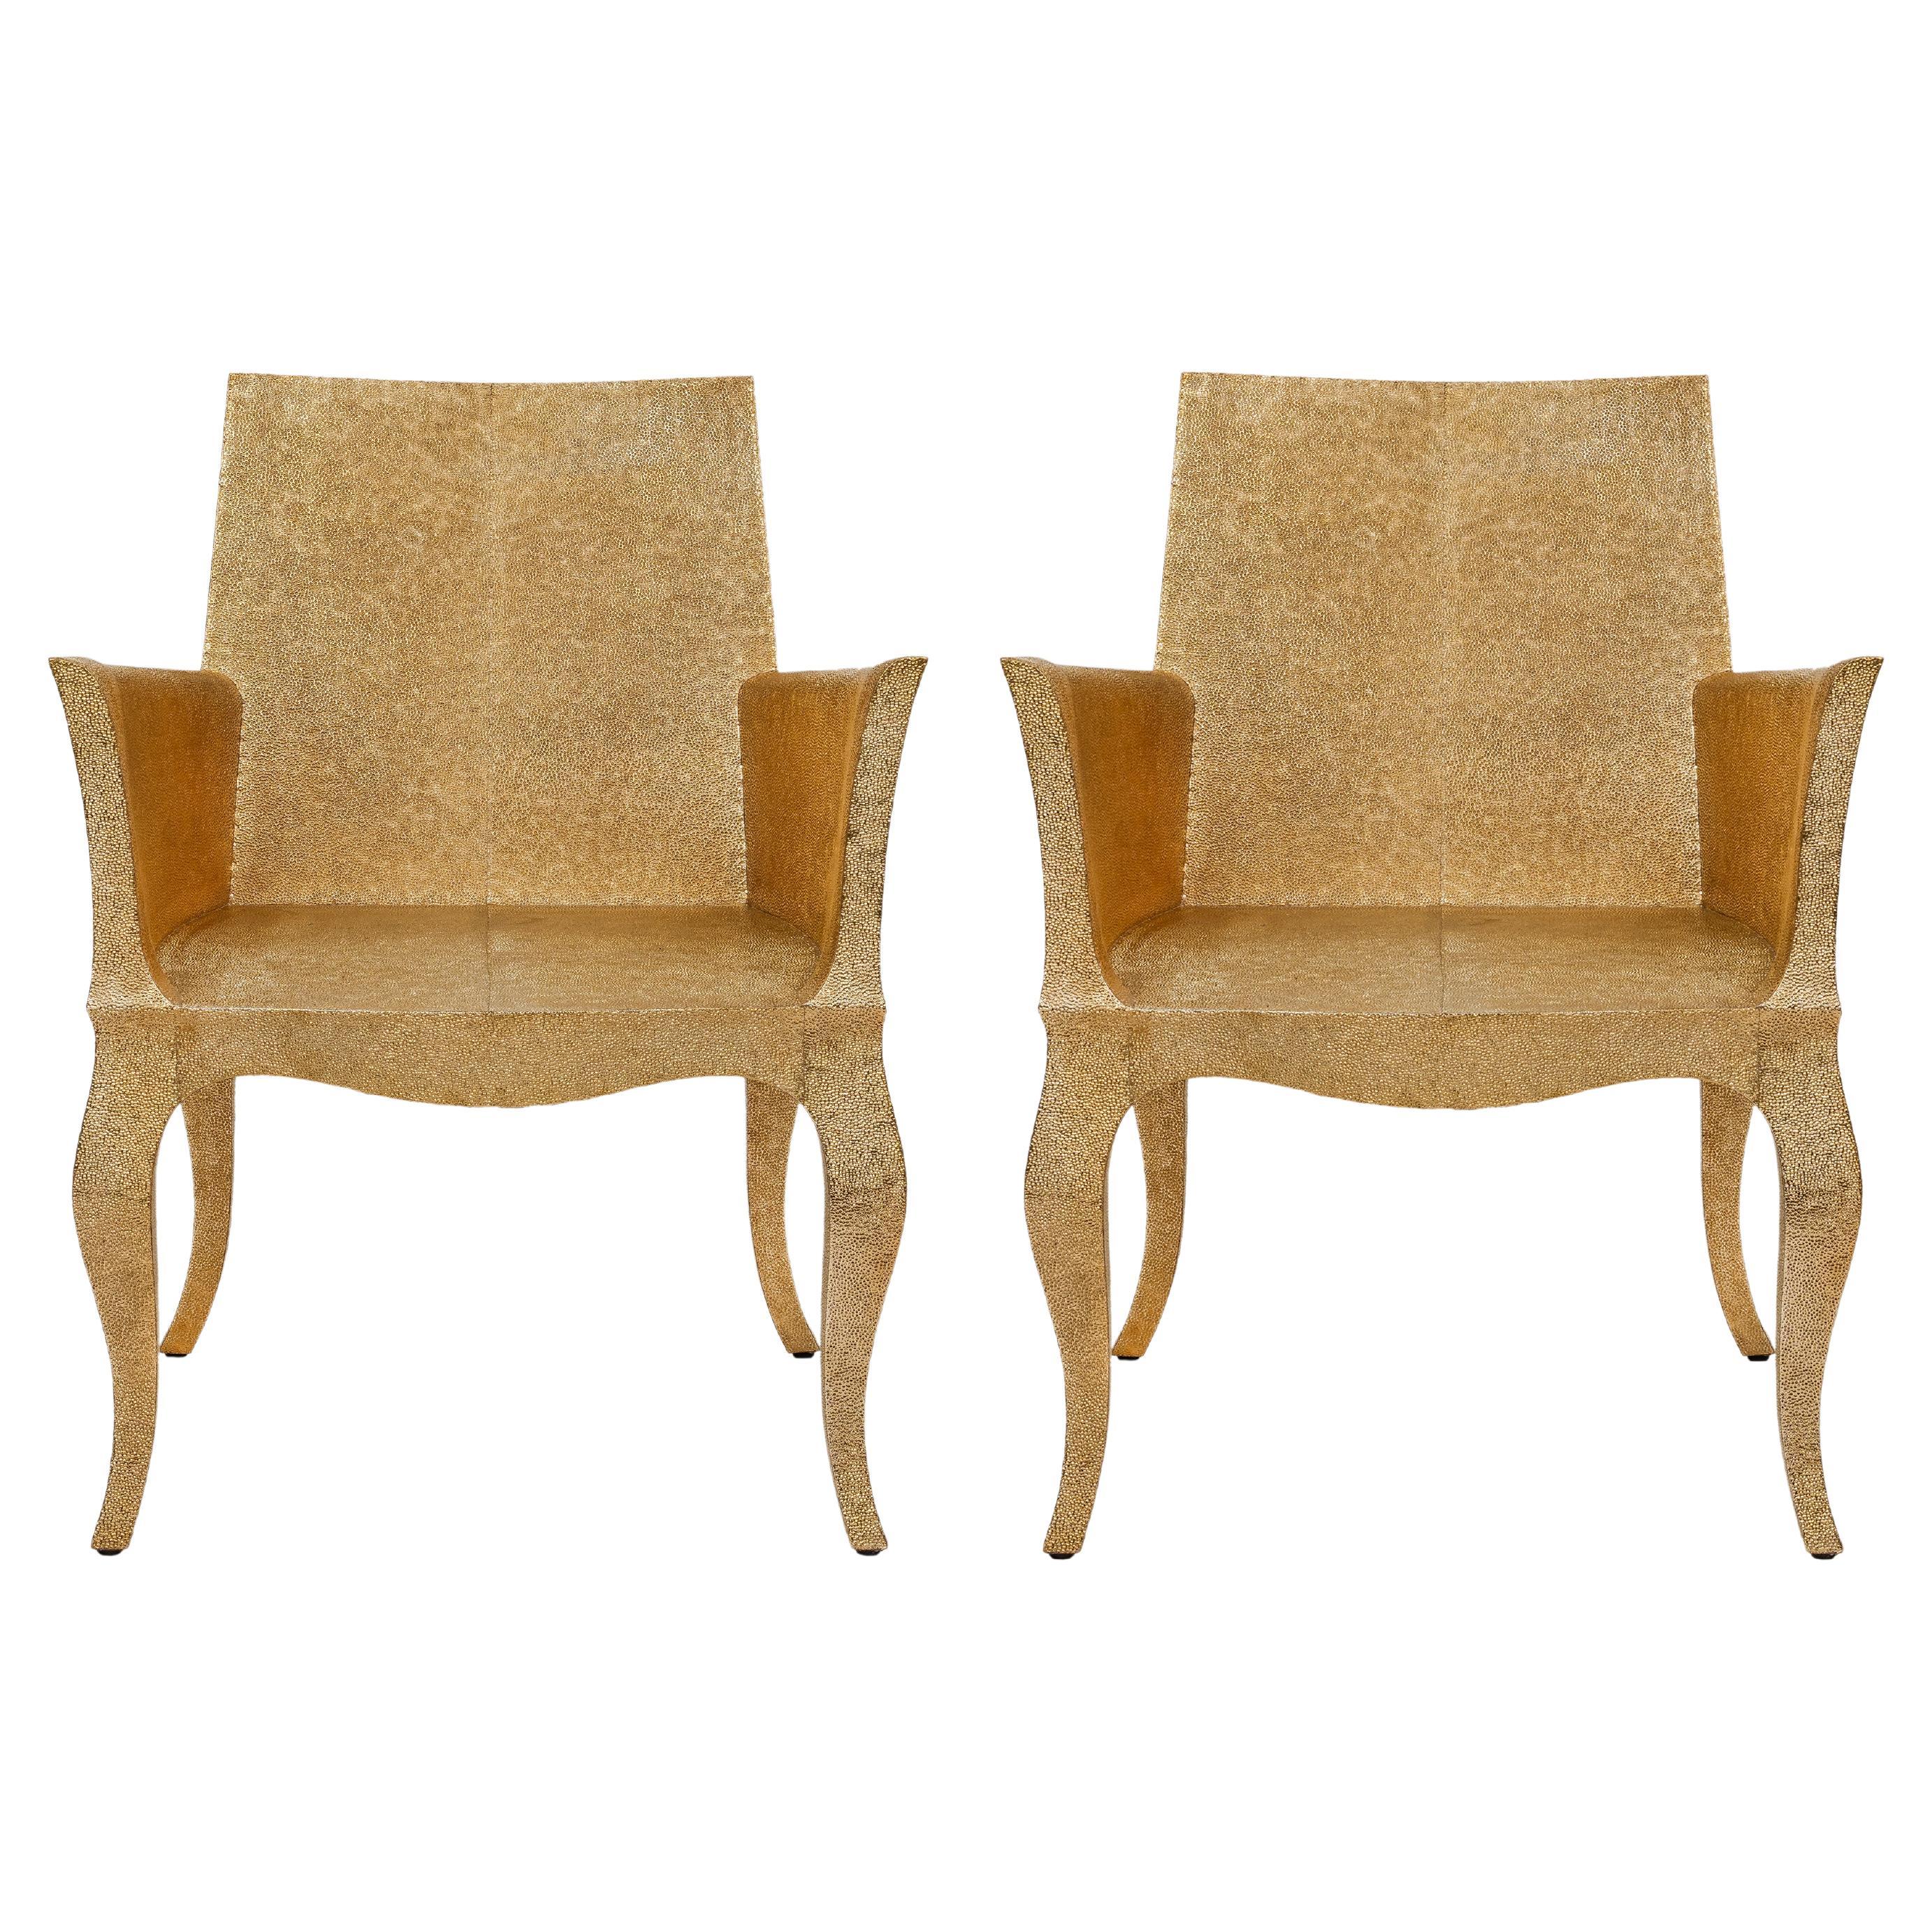 Set of Two Louise Club Chairs in Medium Hammered Brass Over Wood by P. Mathieu